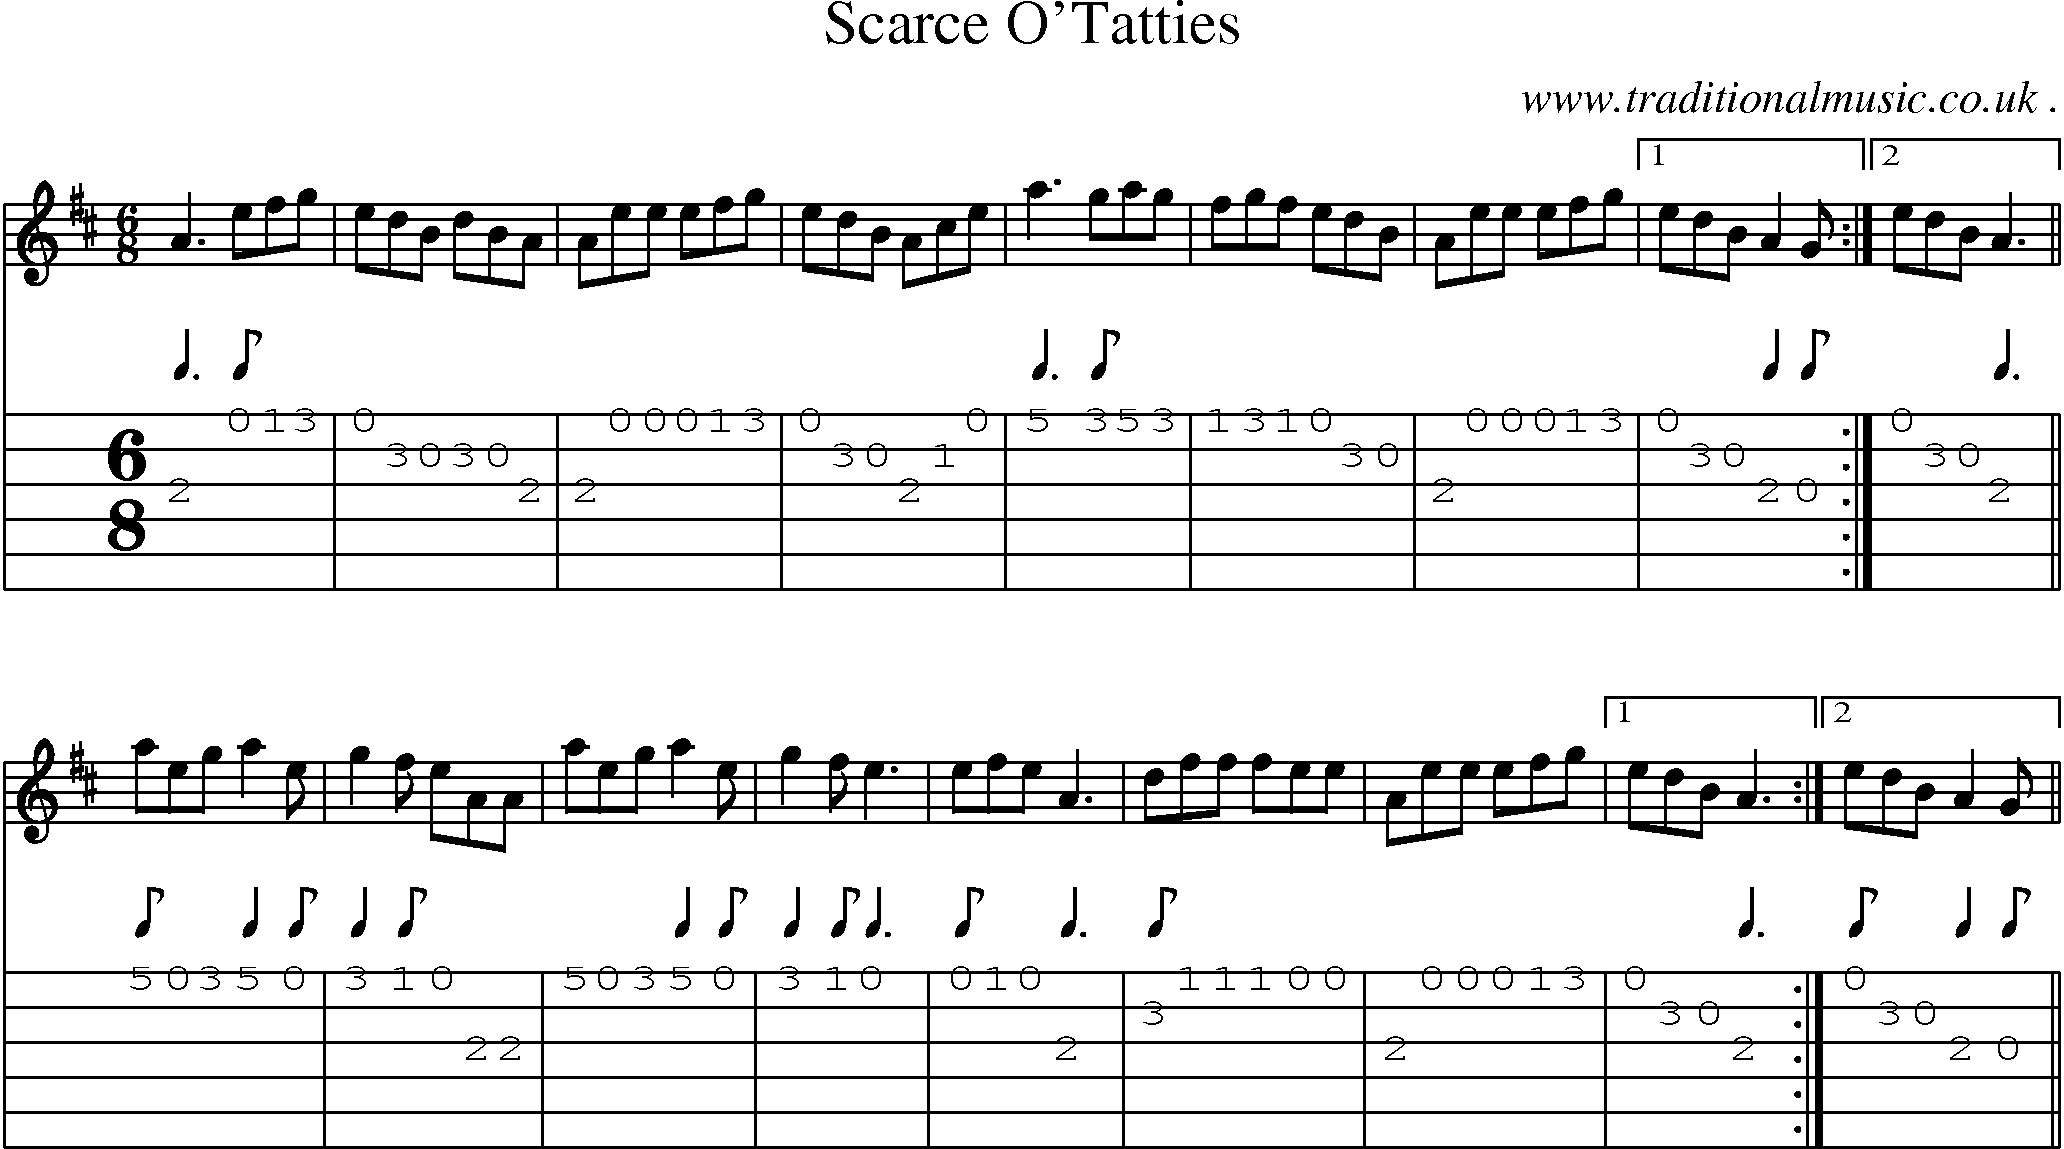 Sheet-Music and Guitar Tabs for Scarce Otatties